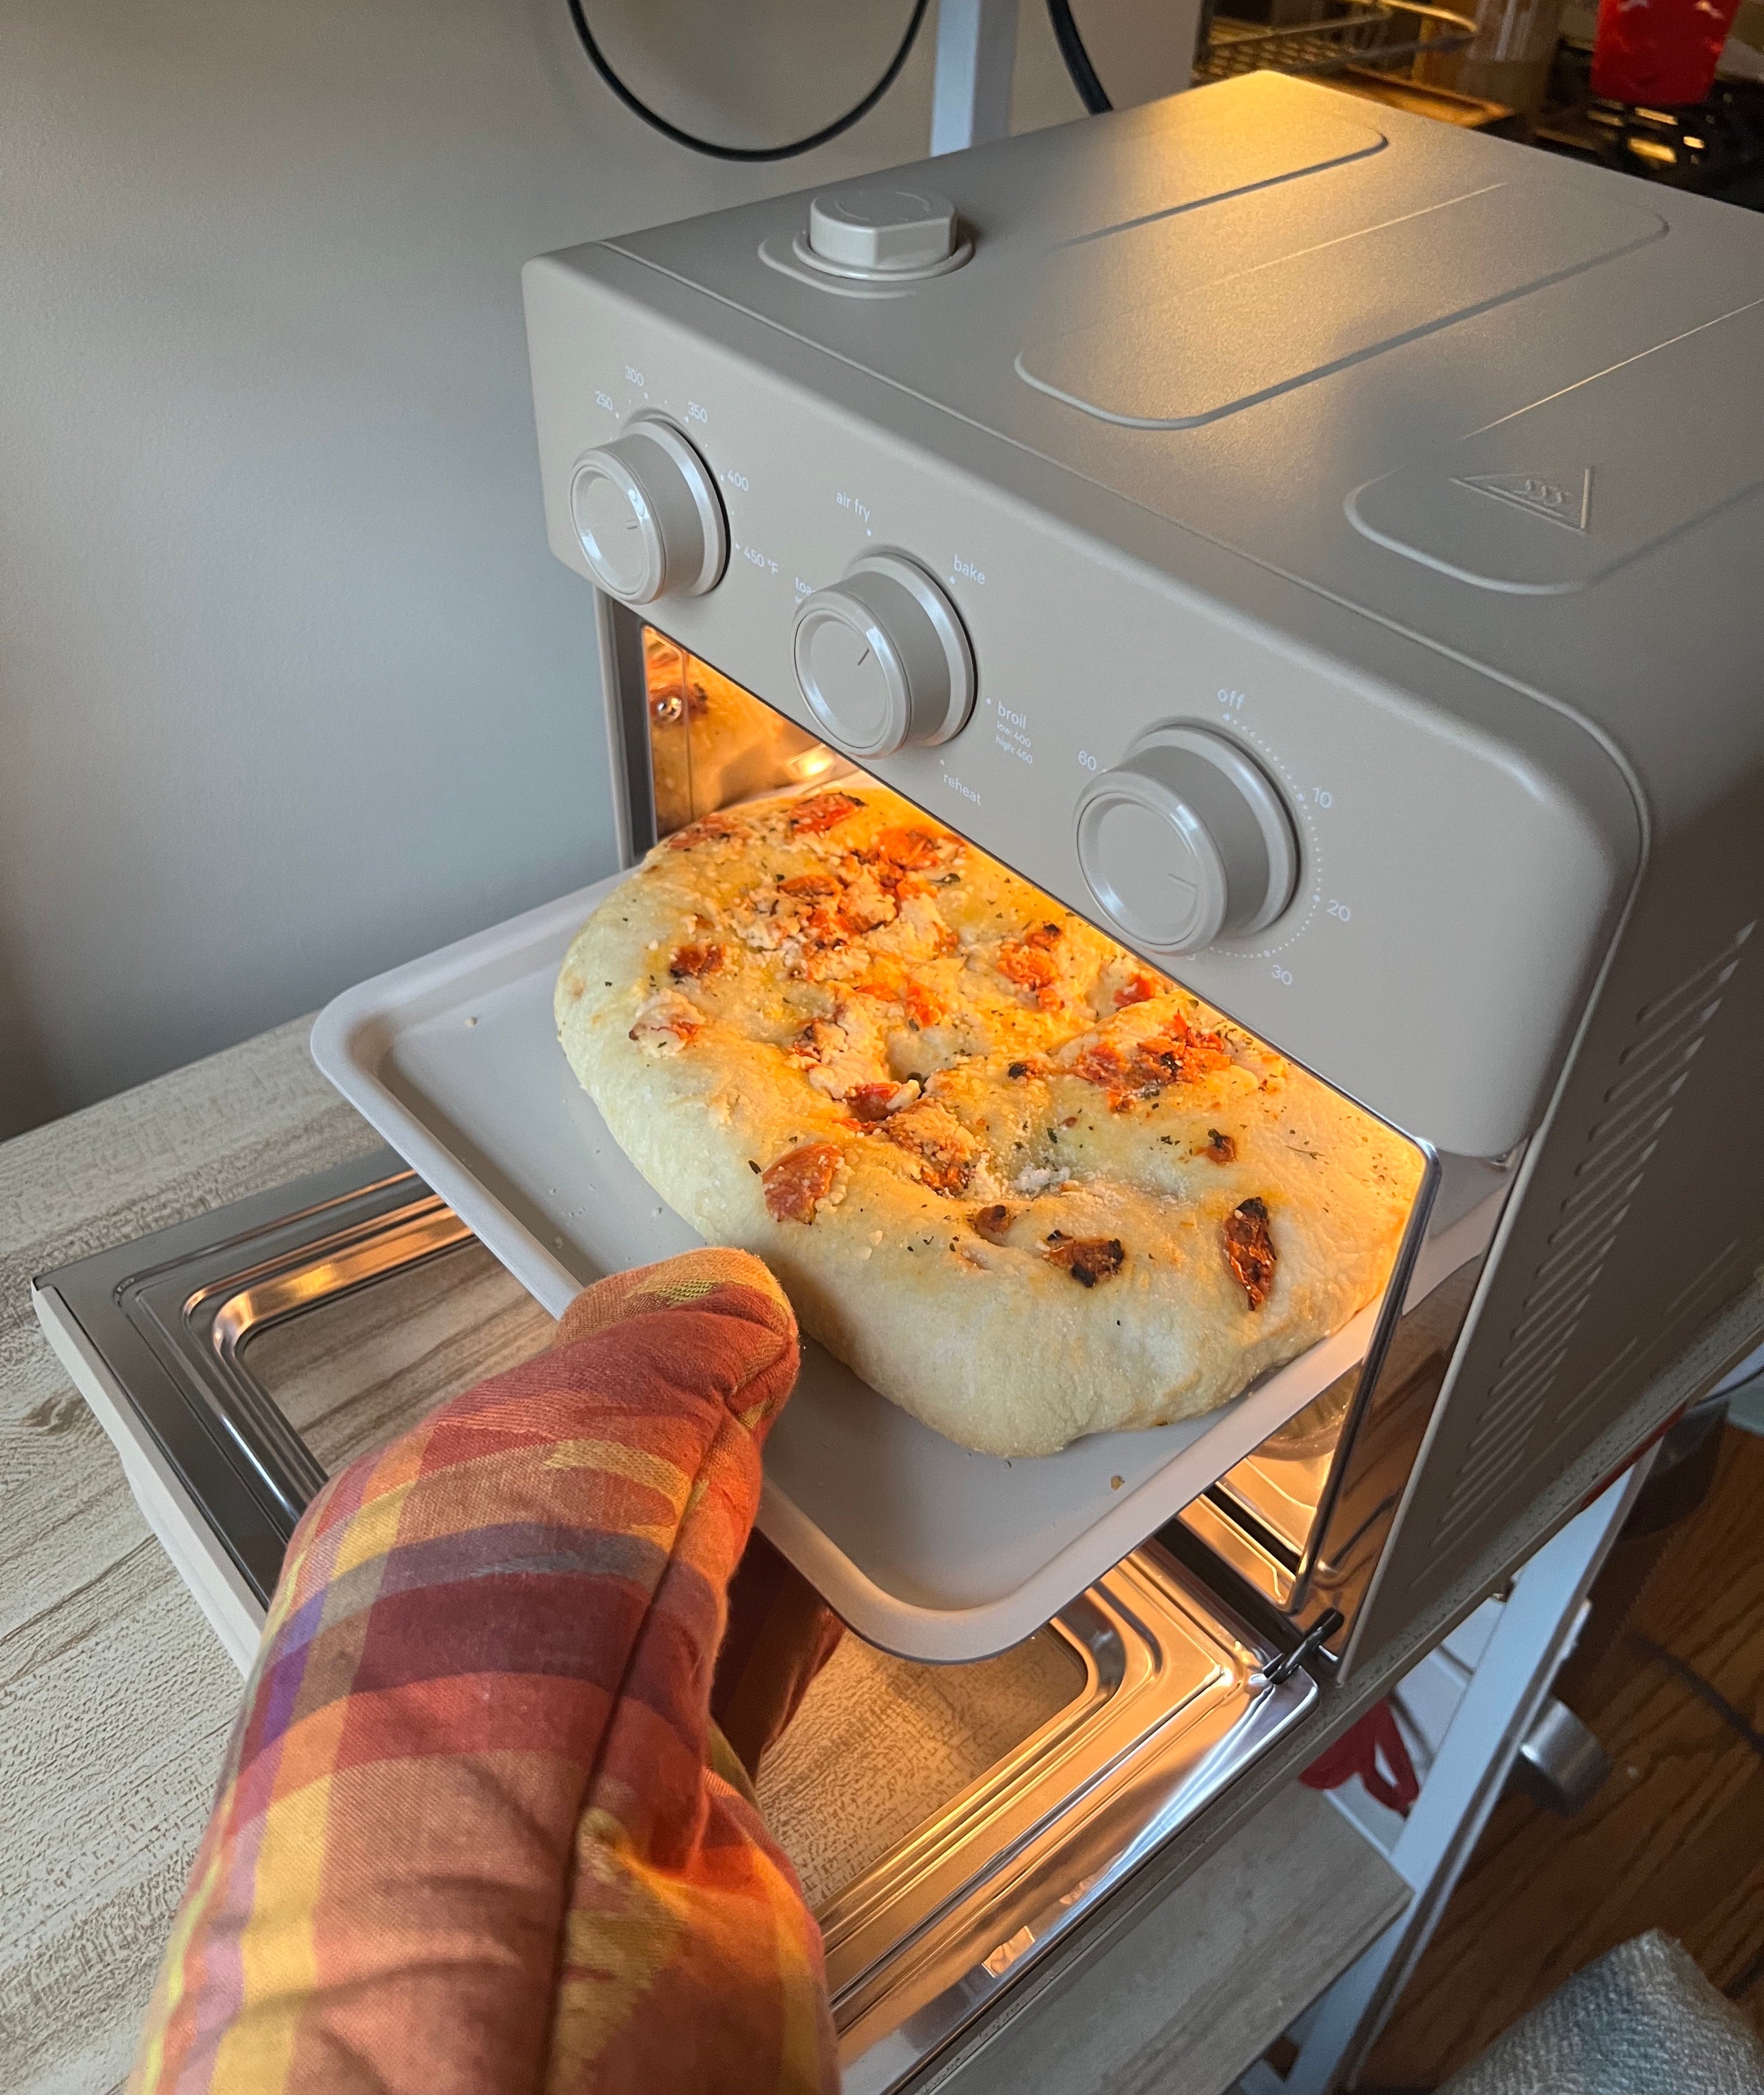 Our Place Wonder Oven Launches: Here's What We Know